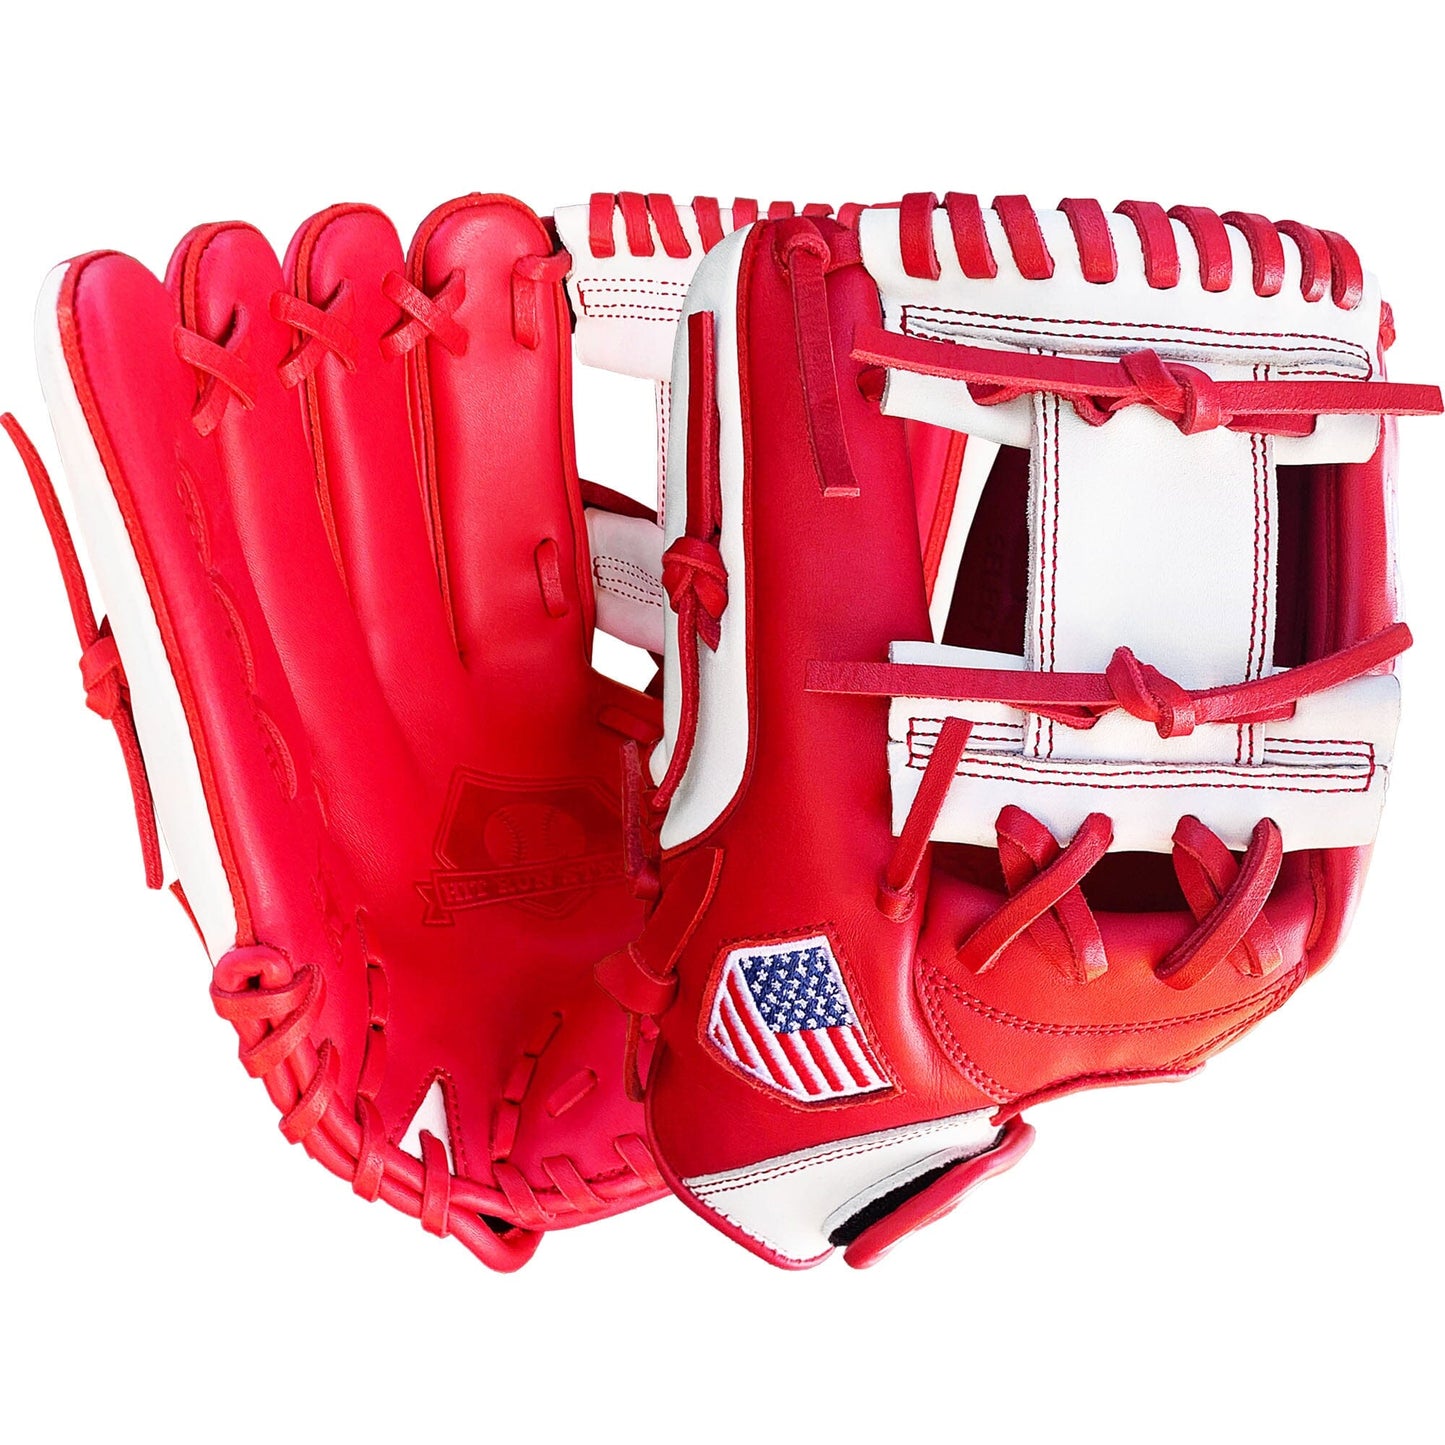 11.5" - Red and White - I Web